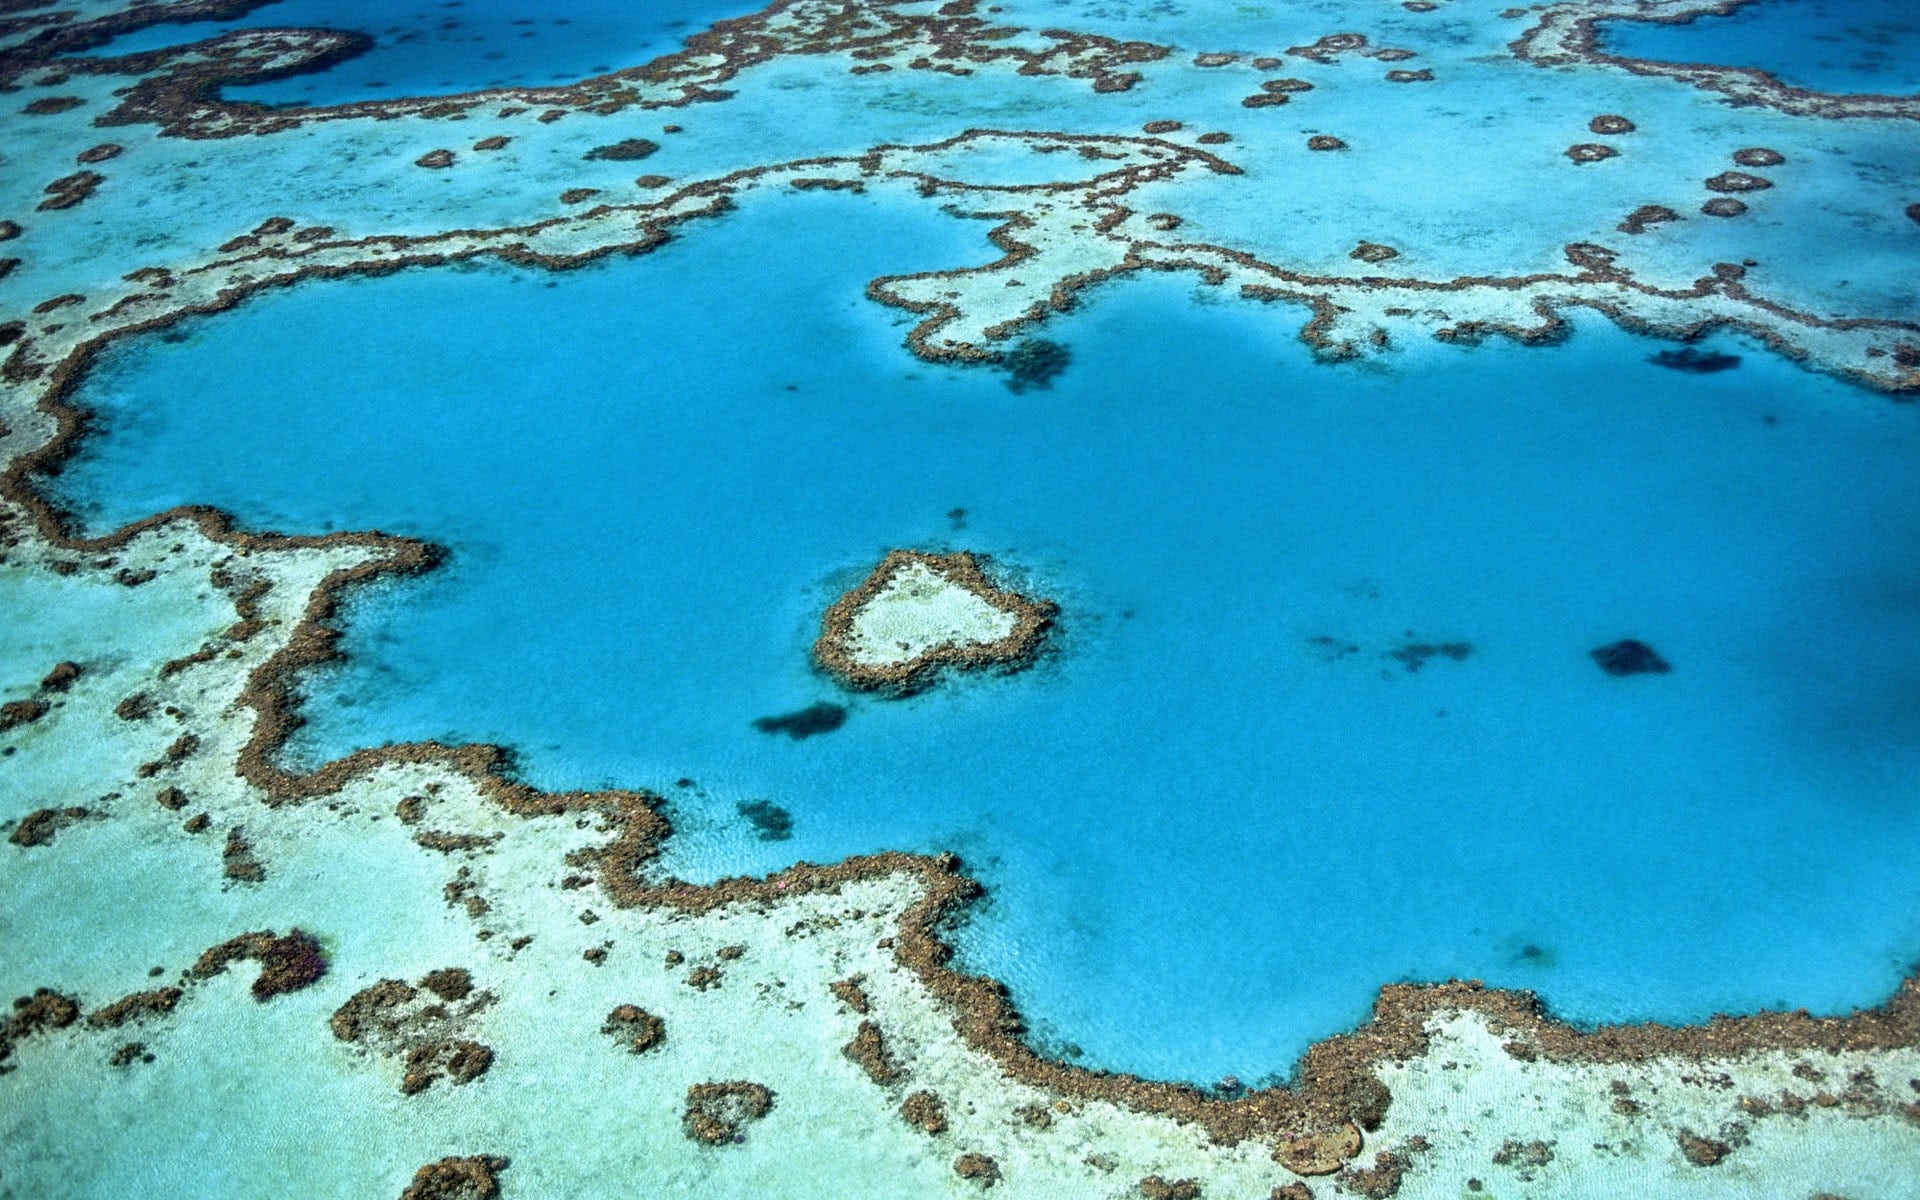 Great Barrier Reef in Australia - A Definitive Guide for Travellers